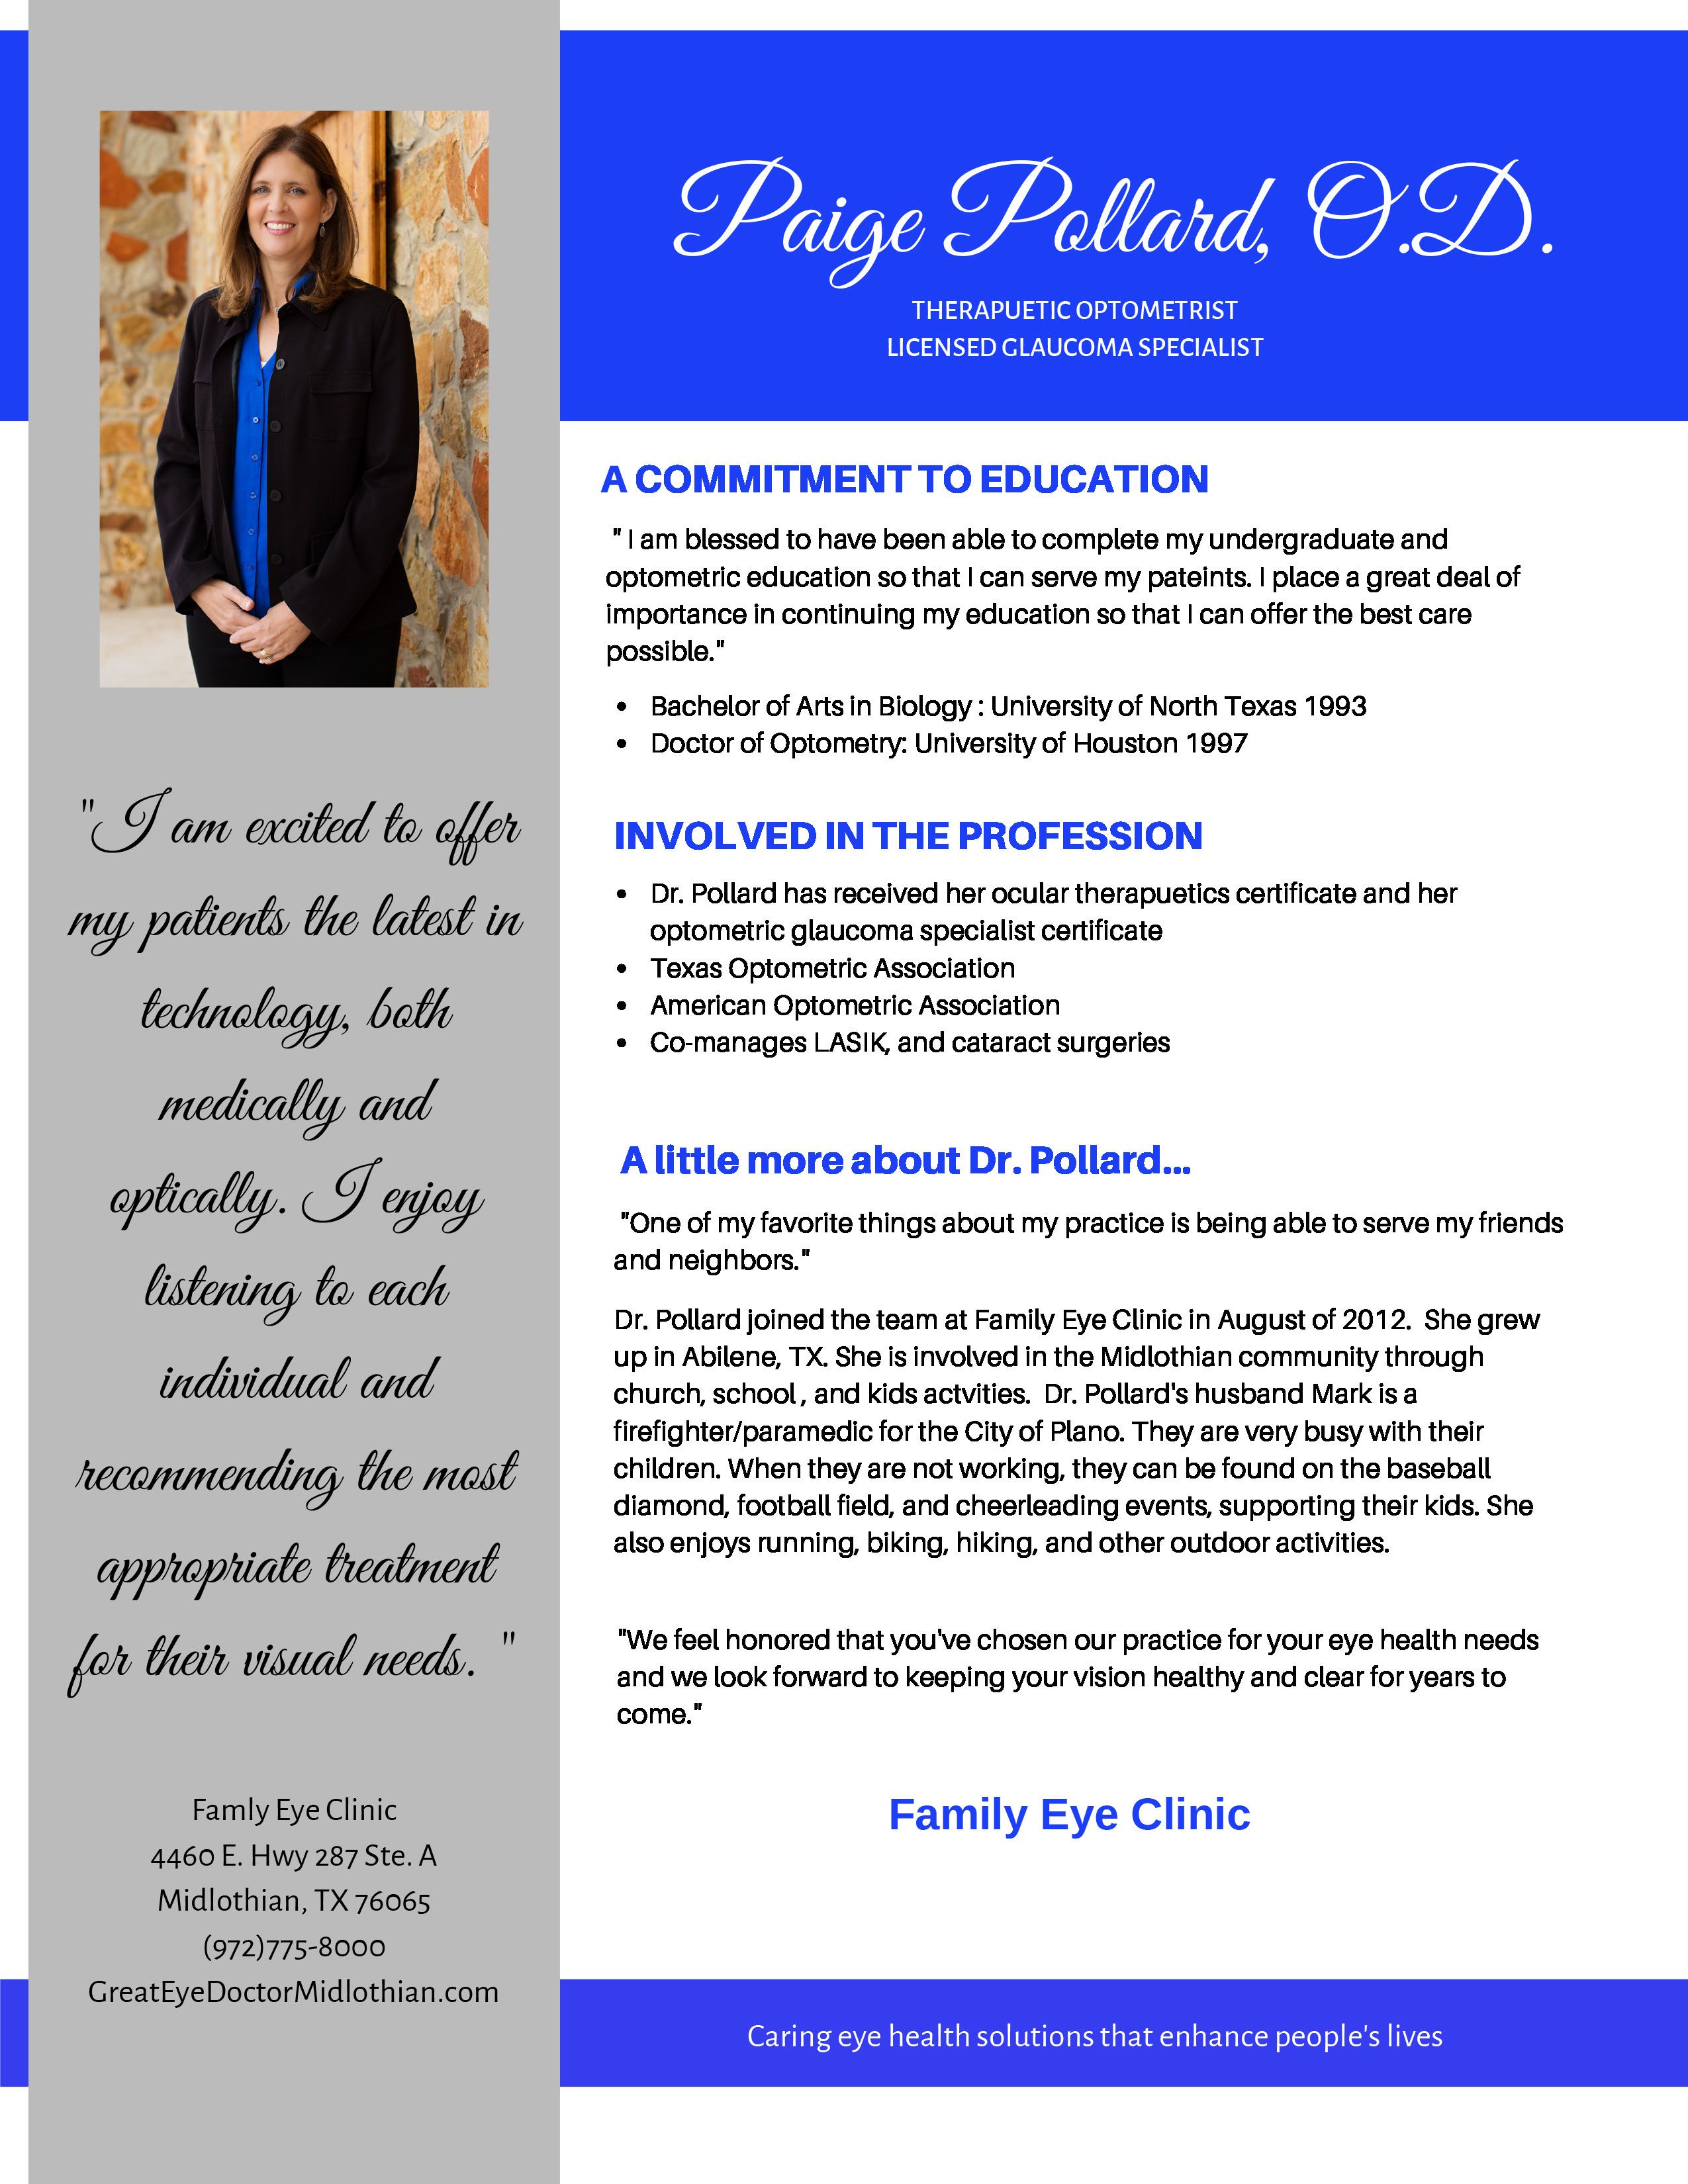 Dr. Paige Pollard, O.D. - Therapeutic Optometrist, Licensed Glaucoma Specialist